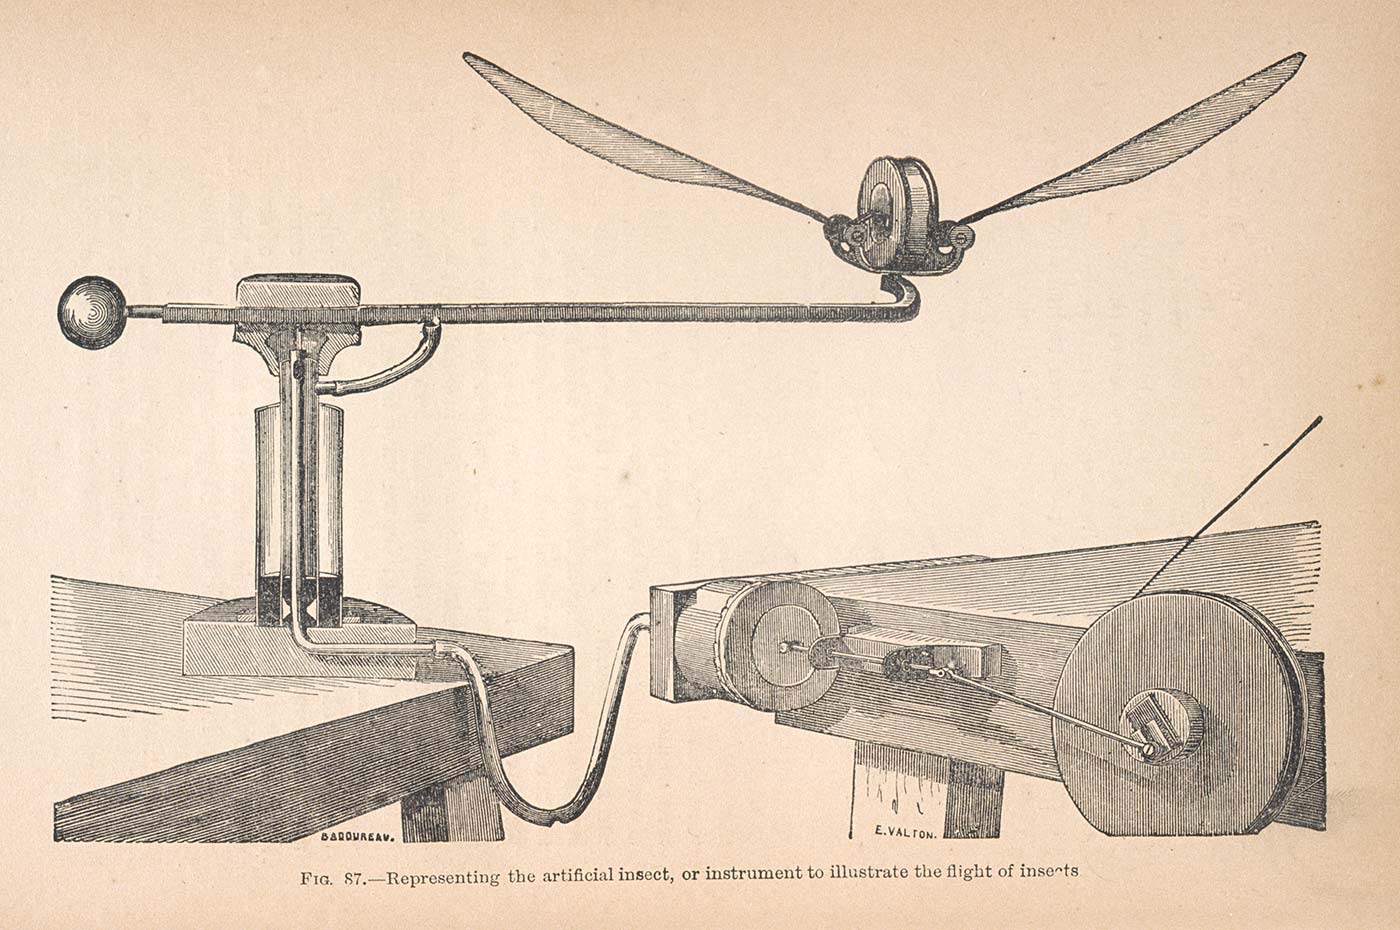 Fig. 87: Representing the artificial insect, or instrument to illustrate the flight of insects.